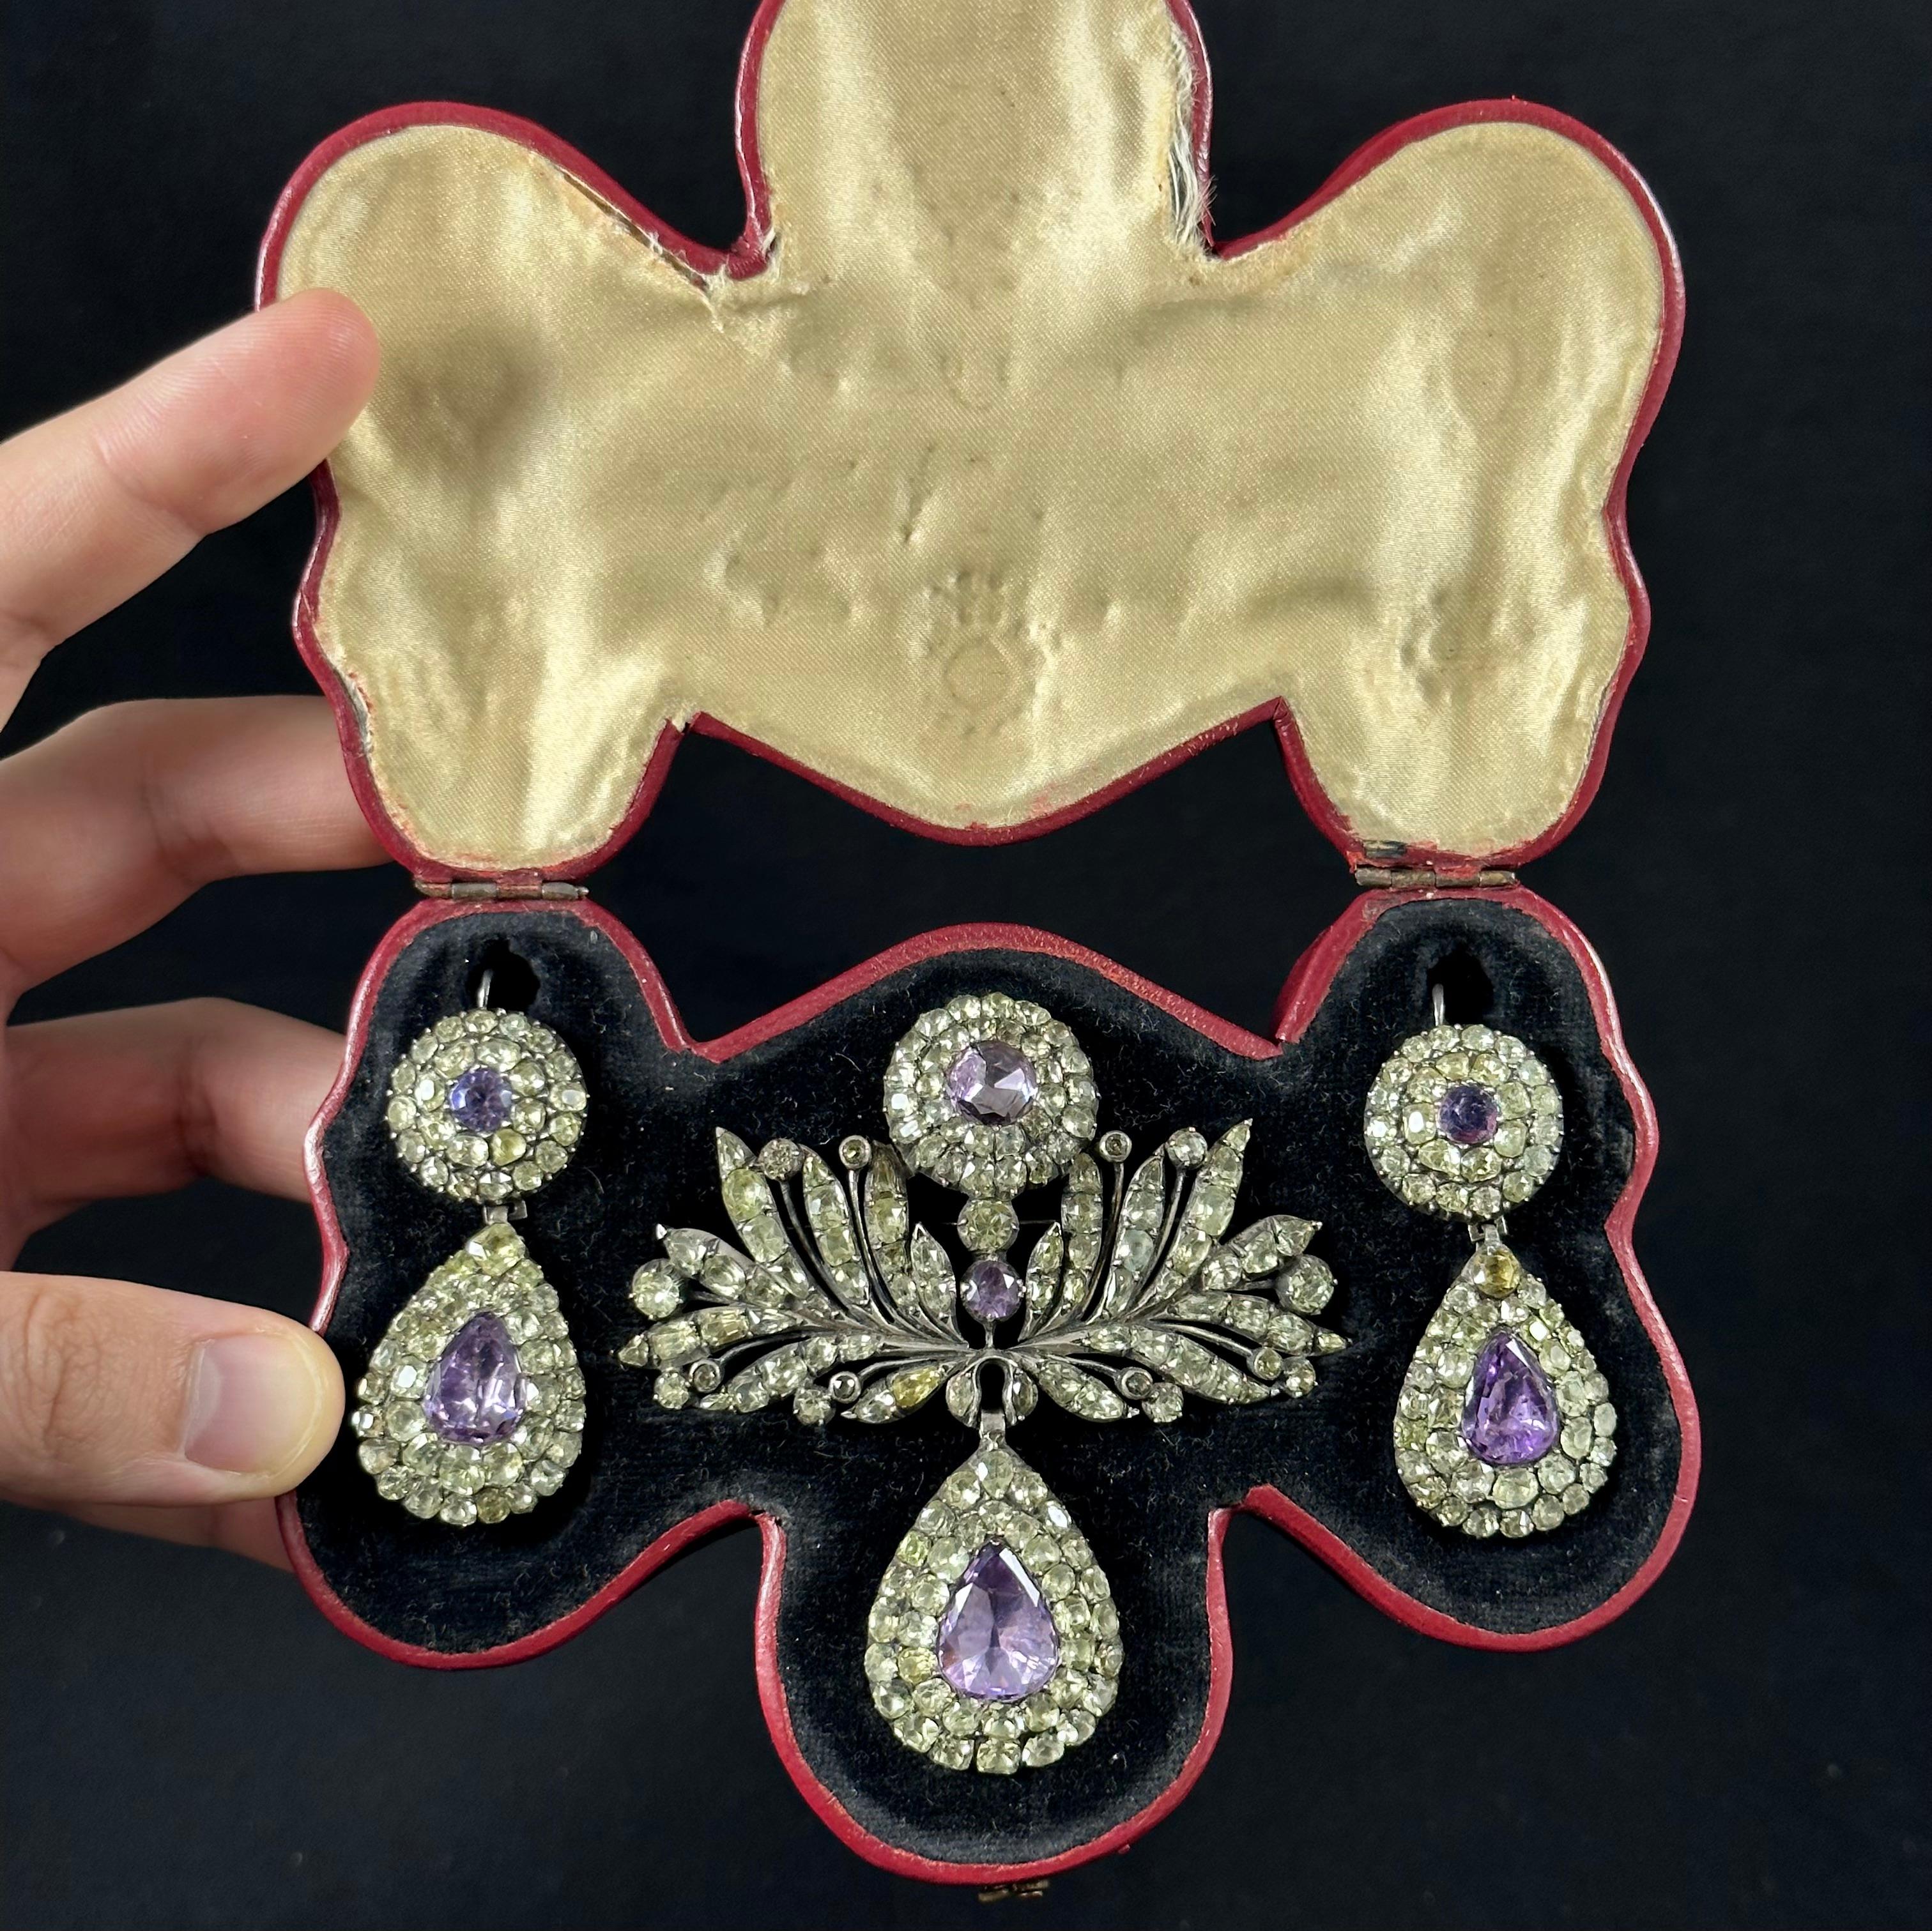 Antique Chrysolite Chrysoberyl Amethyst Brooch Earrings Silver Set Portuguese For Sale 4